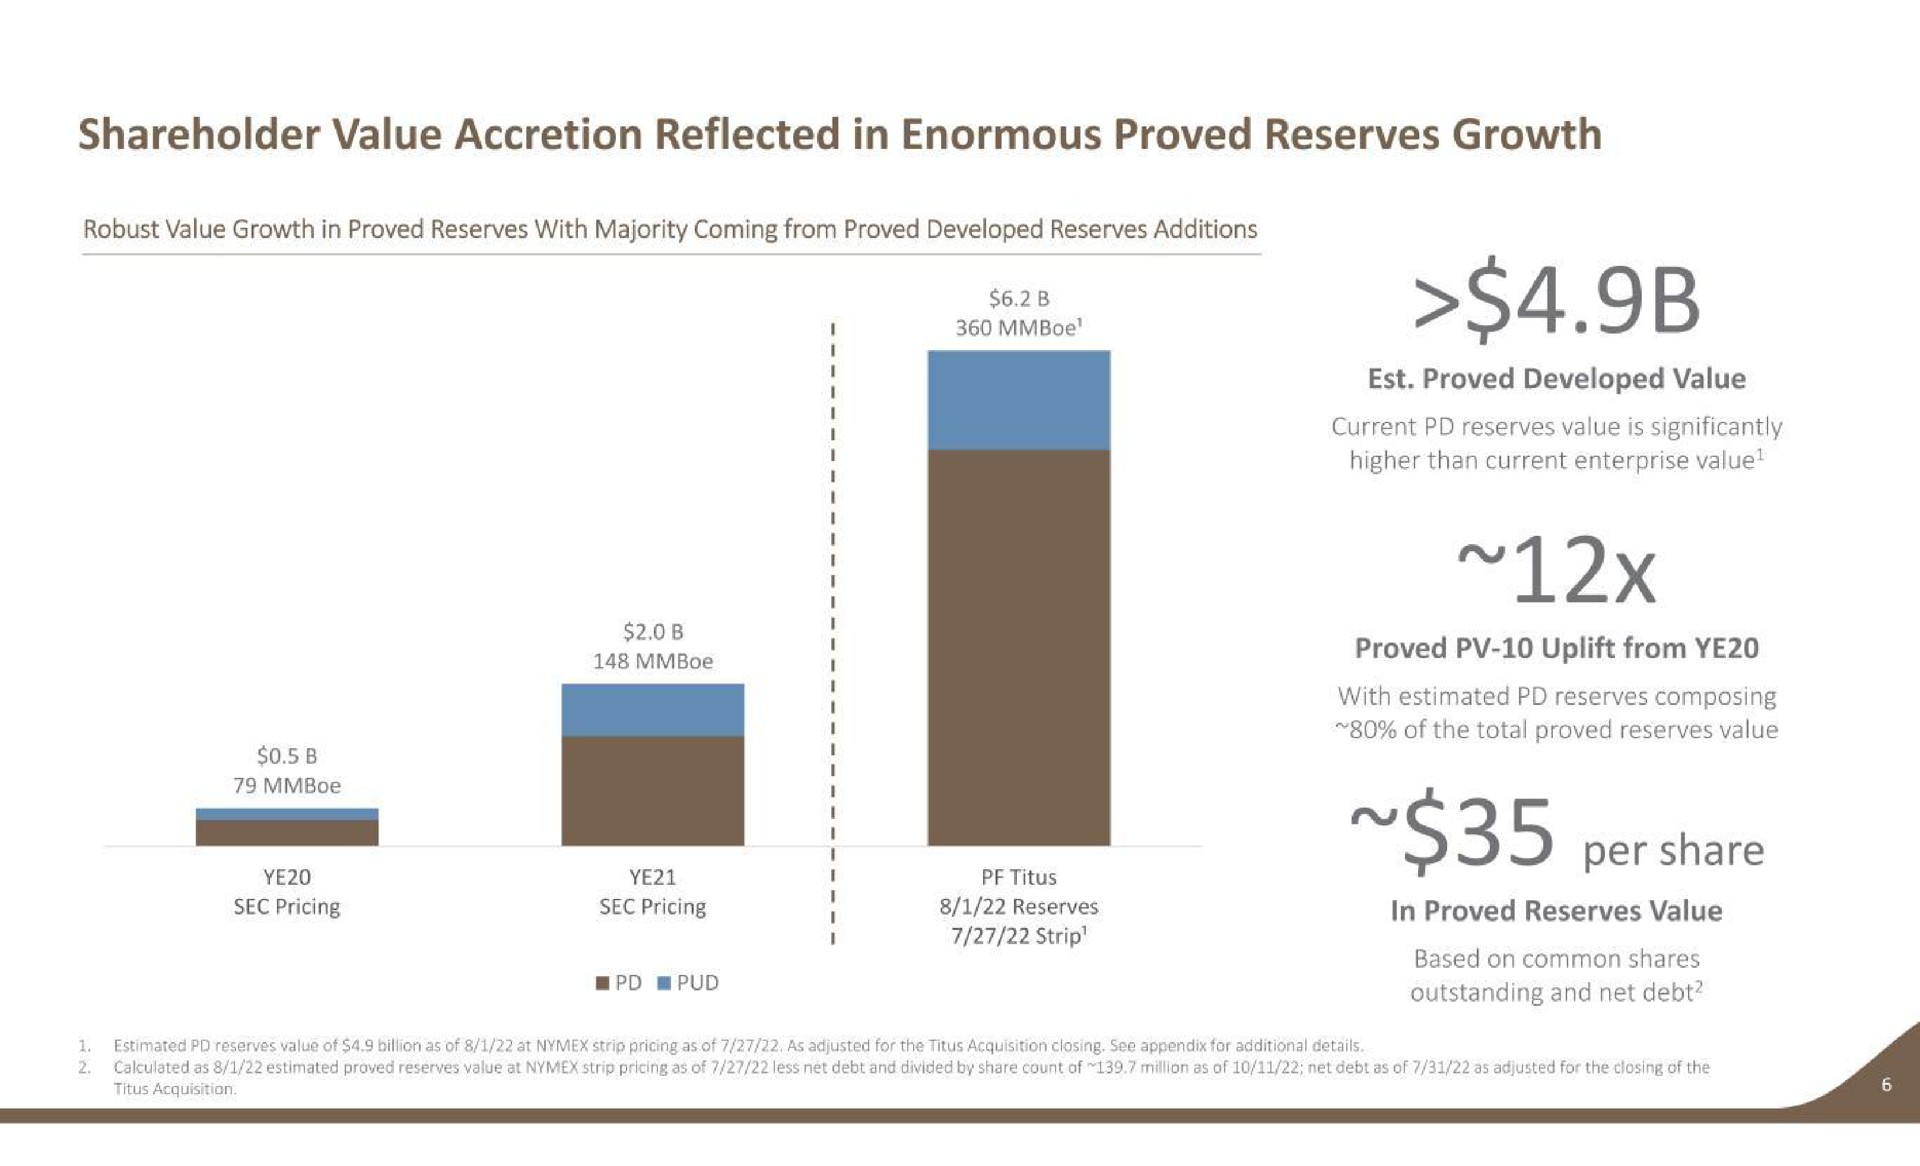 shareholder value accretion reflected in enormous proved reserves growth robust value growth in proved reserves with majority coming from proved developed reserves additions sec pricing pud reserves strip proved developed value proved uplift from per share in proved reserves value outstanding and net debt poy sec pricing | Earthstone Energy